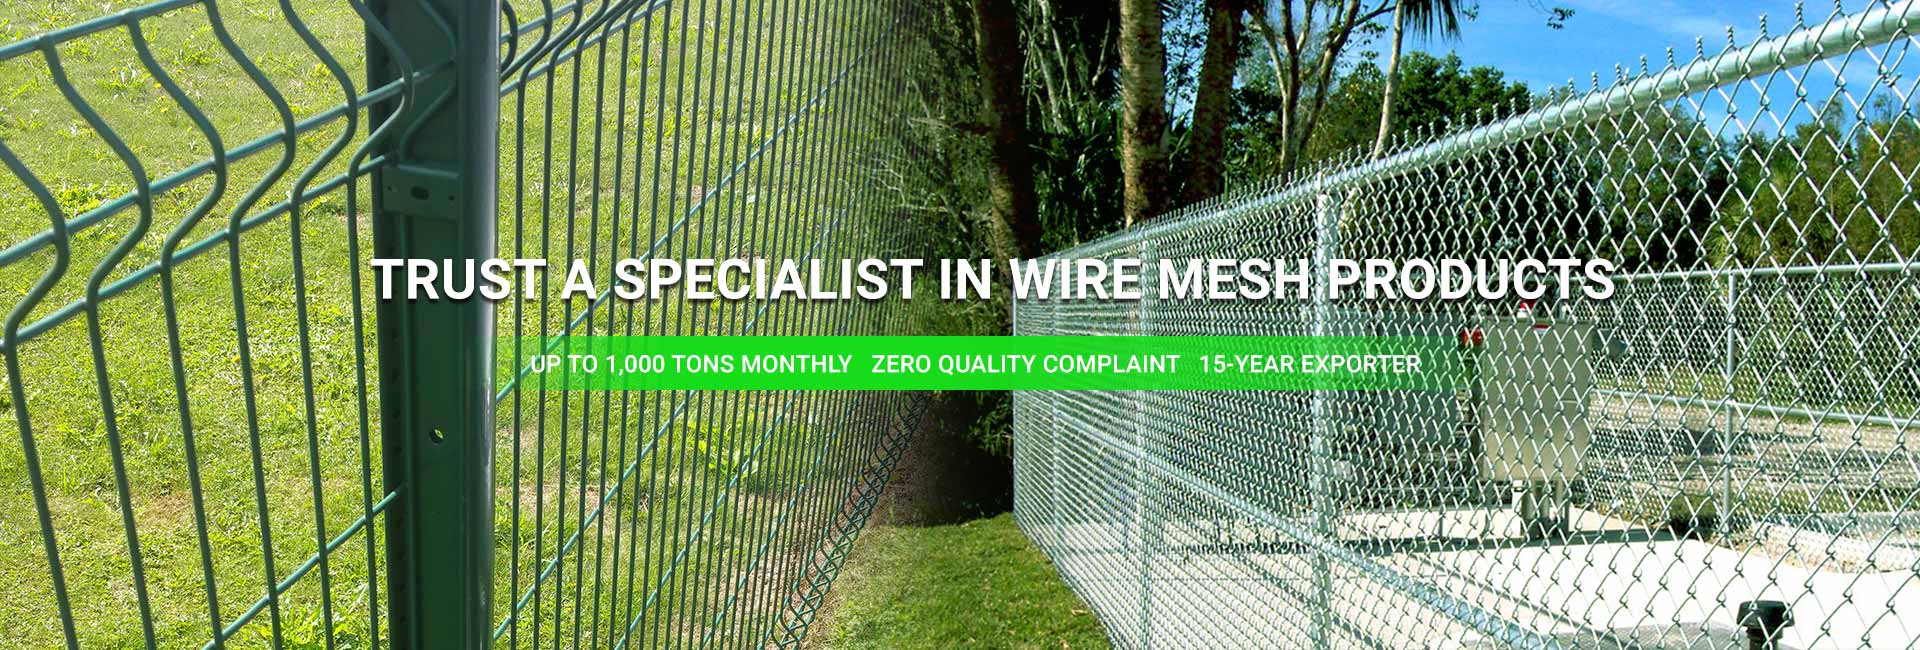 TRUST A SPECIALIST IN WIRE MESH PRODUCTS